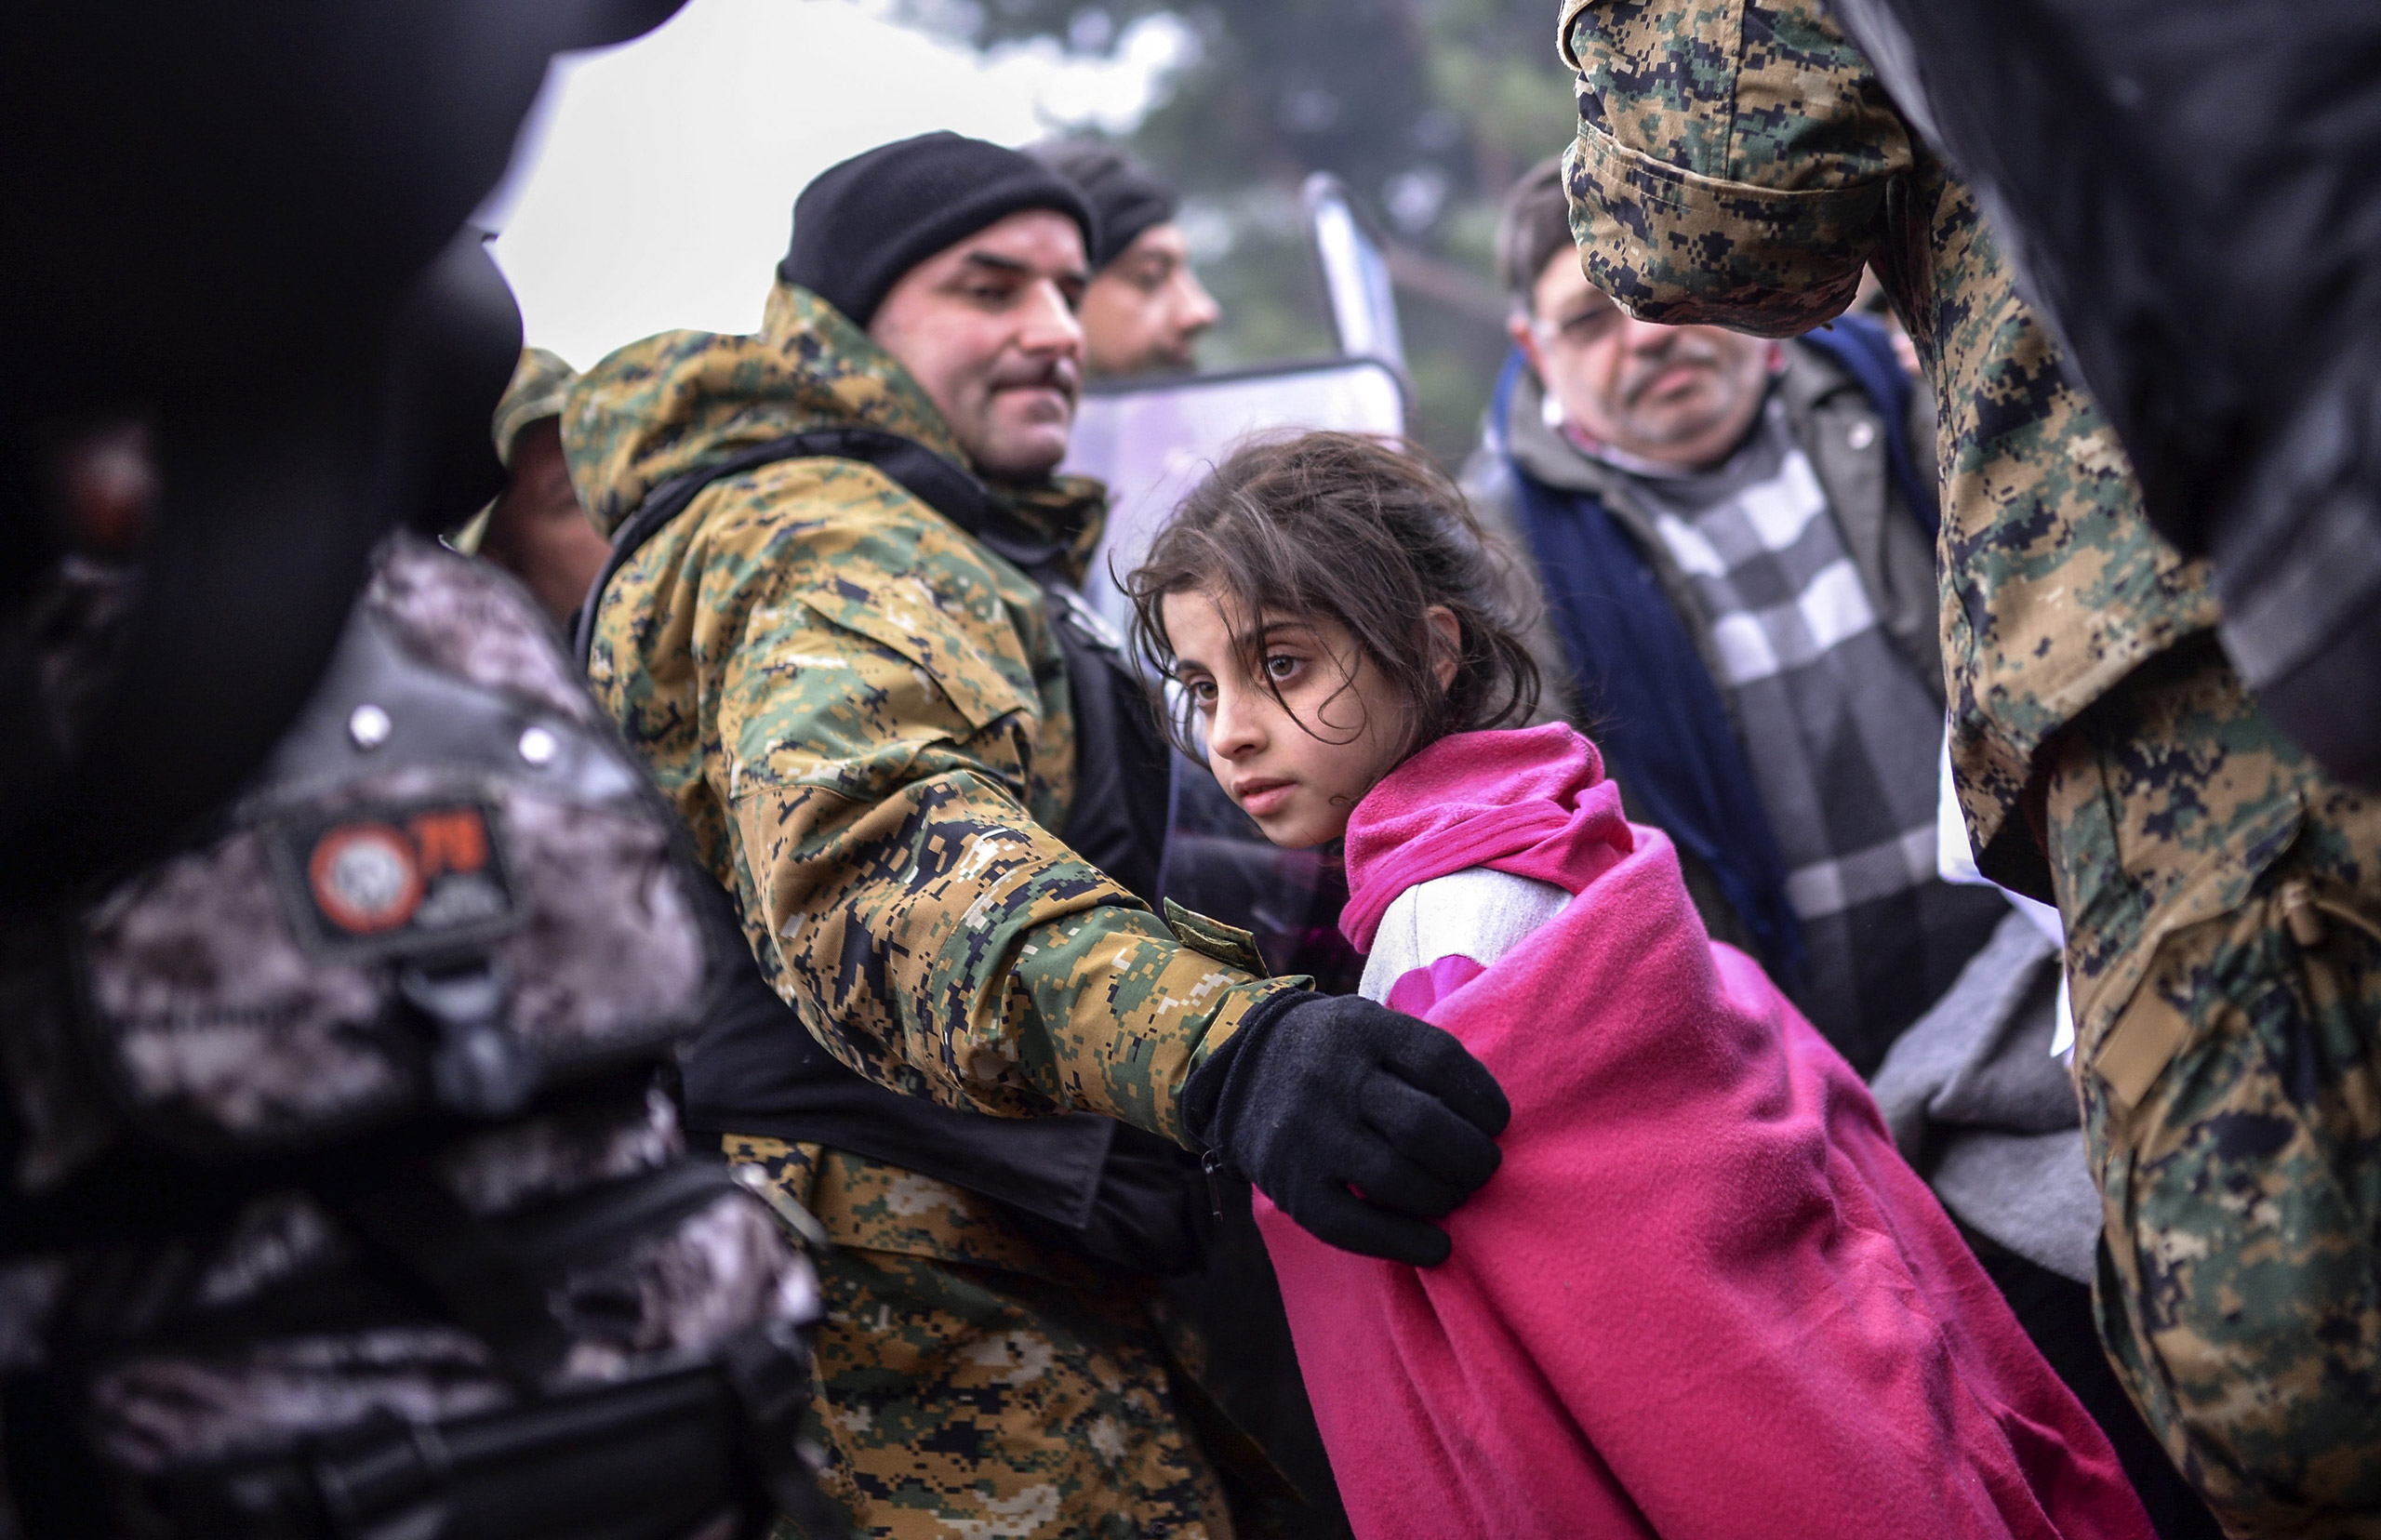 epa05034123 A Macedonian police officer helps a girl to pass between the cordon as migrants and refugees wait to cross the Greek-Macedonian border after Macedonia has started granting passage only to refugees from Syria, Iraq and Afghanistan, near Gevegelija, The Former Yugoslav Republic of Macedonia, 20 November 2015. Macedonia, Serbia and Croatia have started restricting access to migrants on the Balkan route to Syrians, Iraqis and Afghans. It is a part of a joint effort to reduce the number of asylum seekers streaming into the European Union.  EPA/GEORGI LICOVSKI